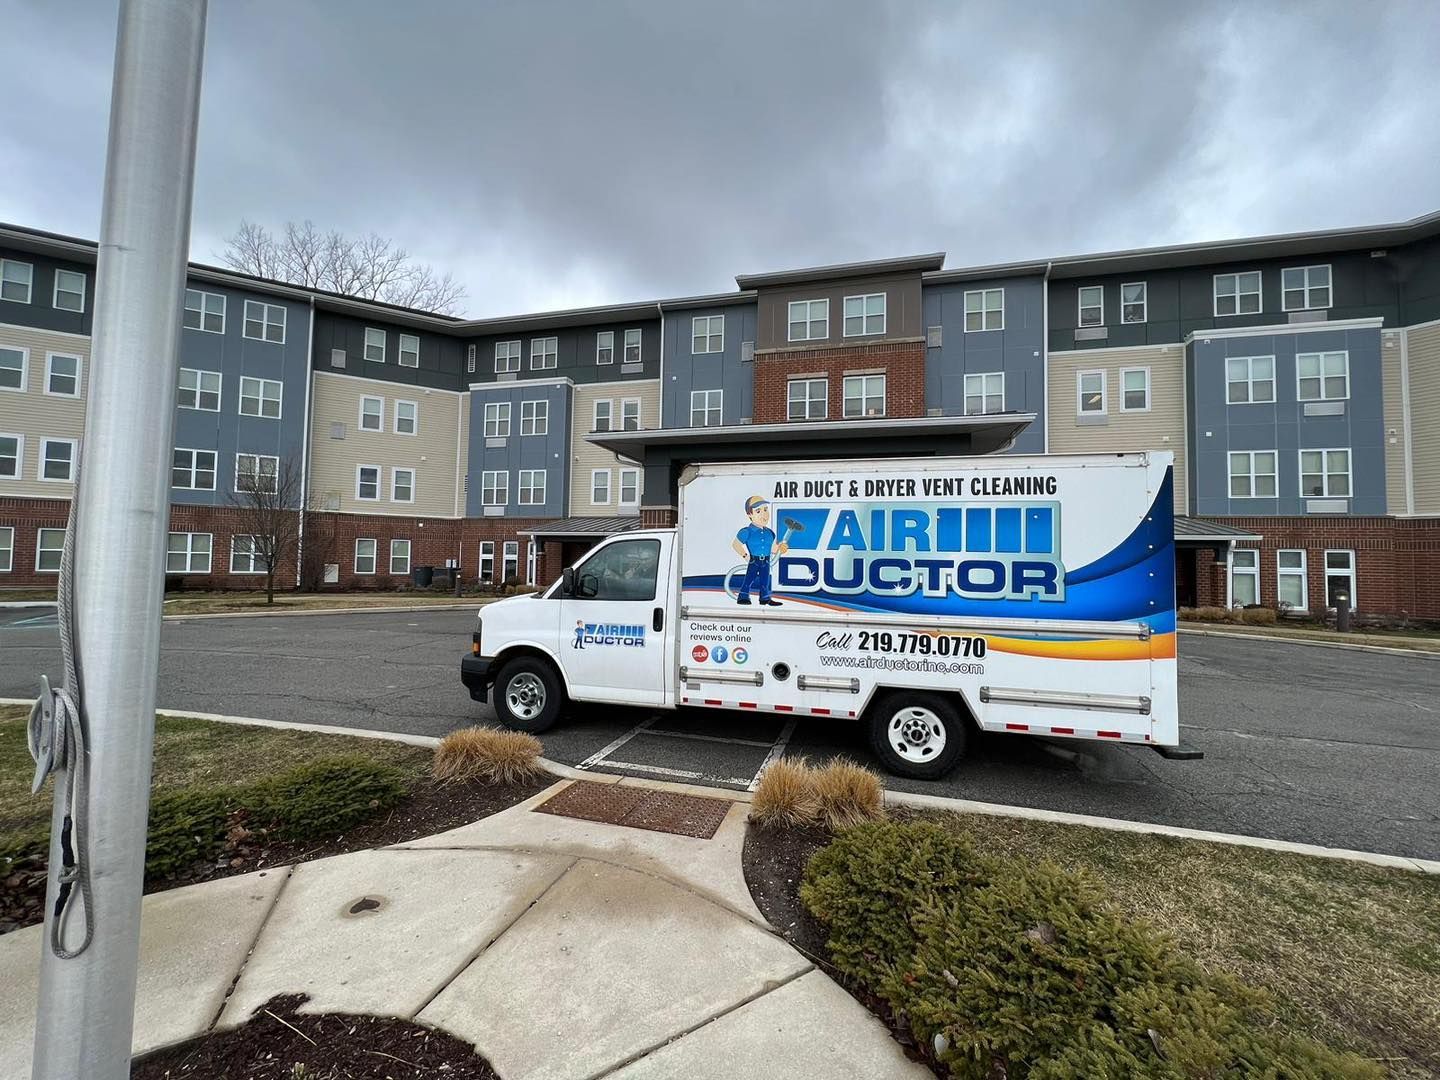 Air Duct & Dryer Vent Cleaning Service in Schererville, IN